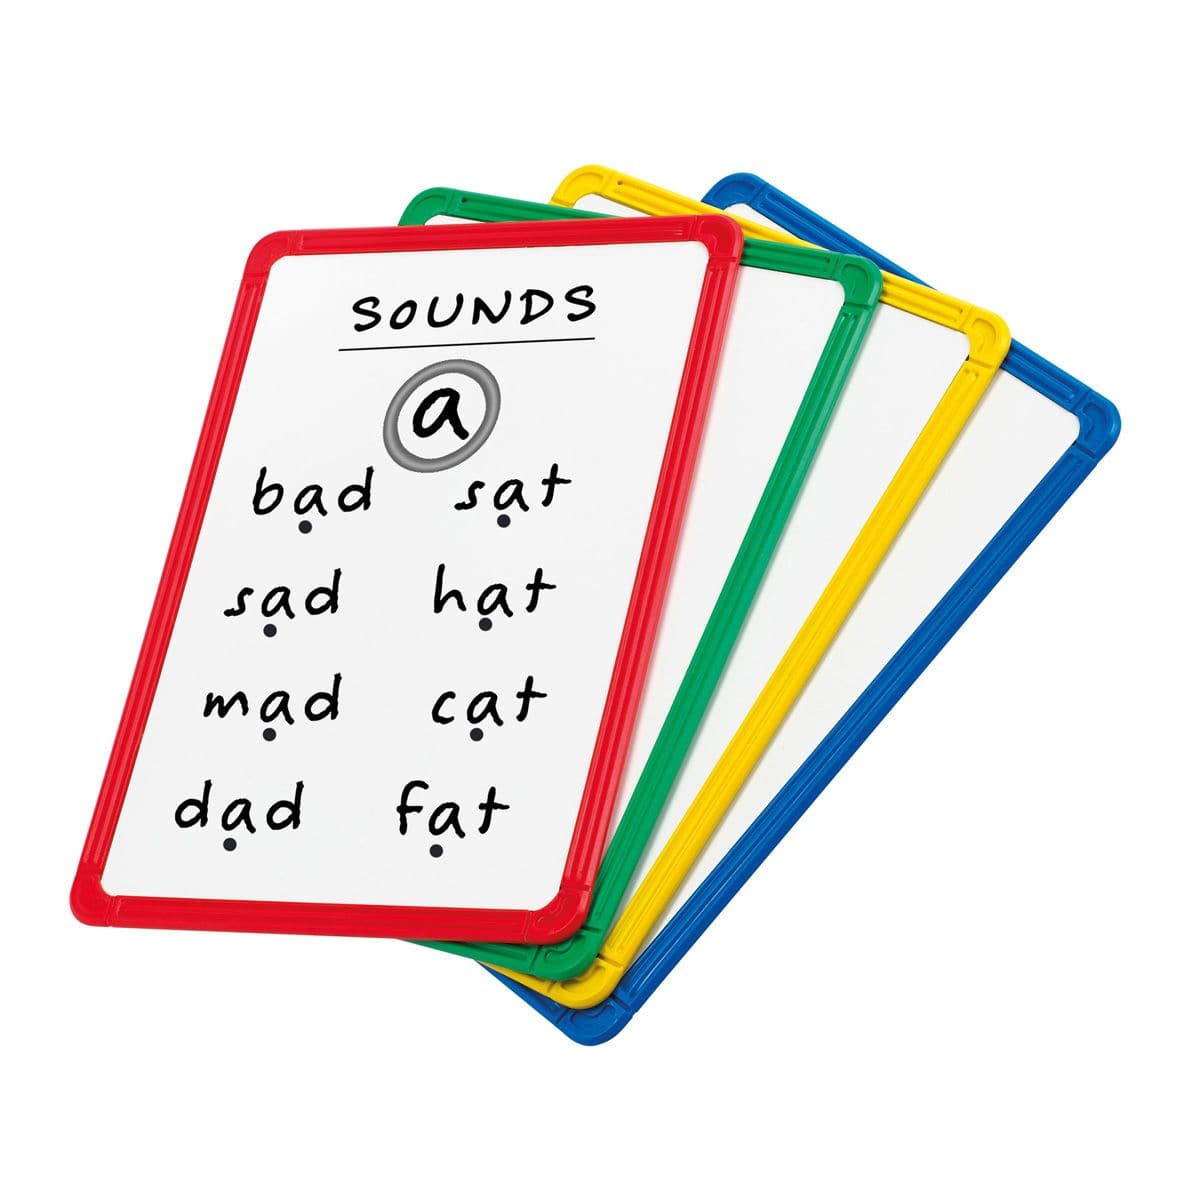 4 Pack Magnetic Plastic Framed Whiteboards, These large magnetic whiteboards are a versatile resource and ideal for a range of uses. Not only can children can write and wipe on them, but they can use them with magnetic letters, numbers and labels. They are very child-friendly, oversized for plenty of creativity yet light and easy to carry. The whiteboards have plastic frames in four colours. Supports developing literacy, pre-writing and writing skills, creativity and imagination. 4 large whiteboards Magneti